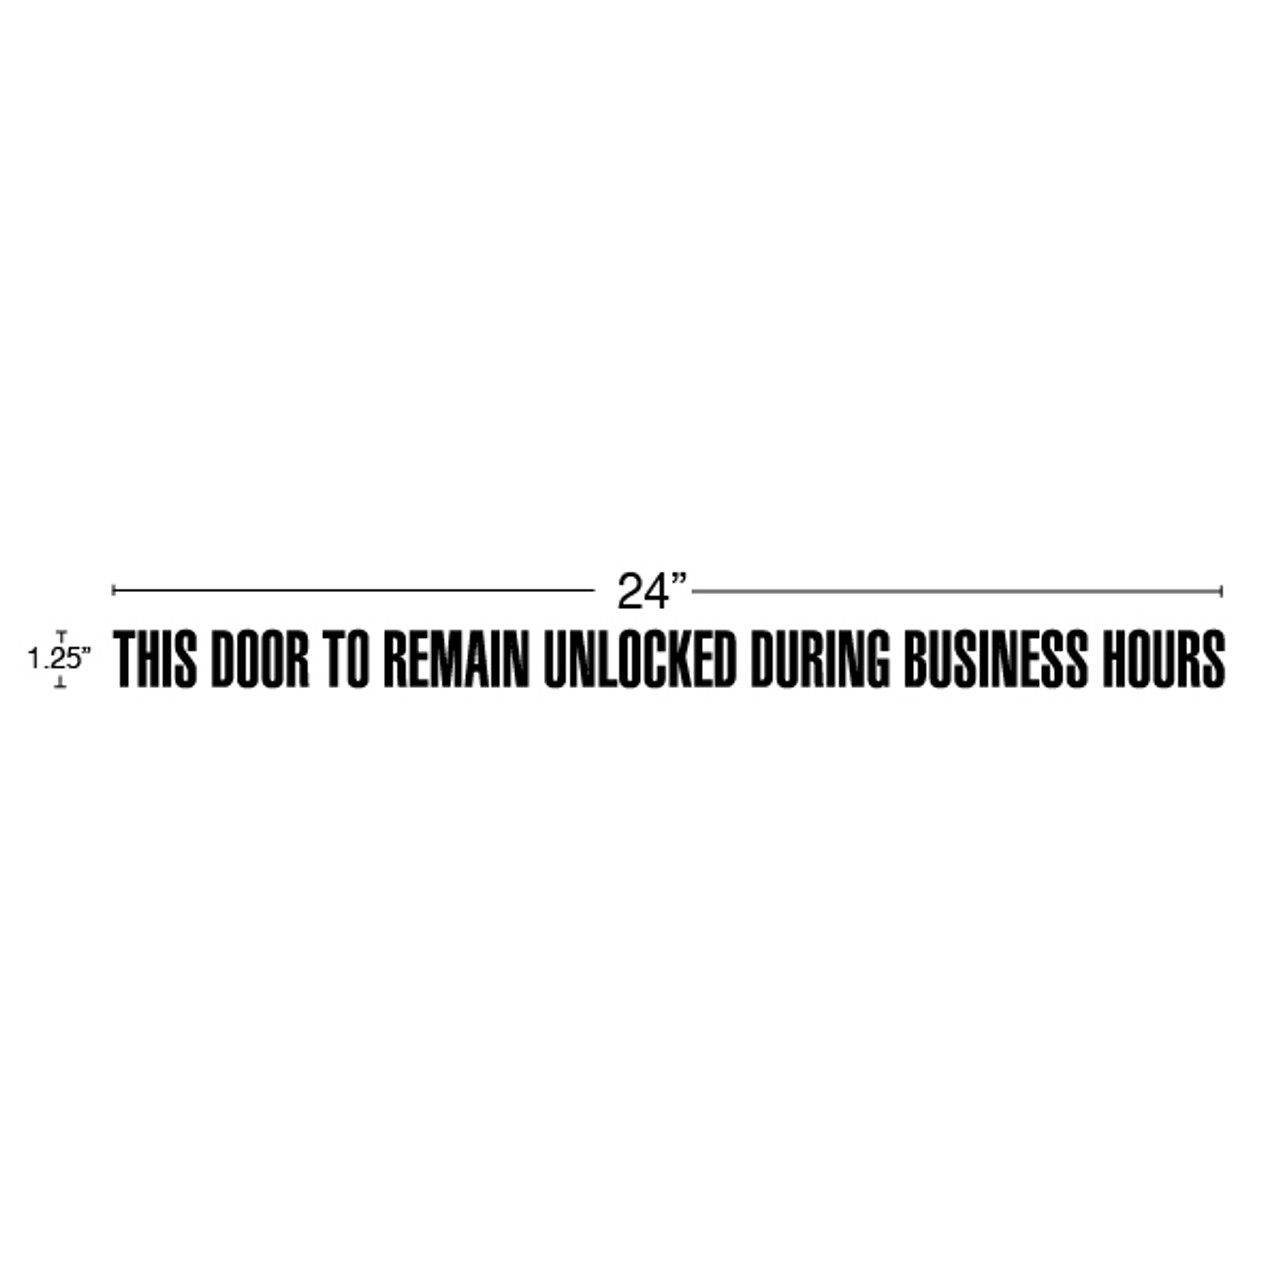 THIS DOOR TO REMAIN UNLOCKED DURING BUSINESS HOURS SIGN DECAL VINYL STICKER 